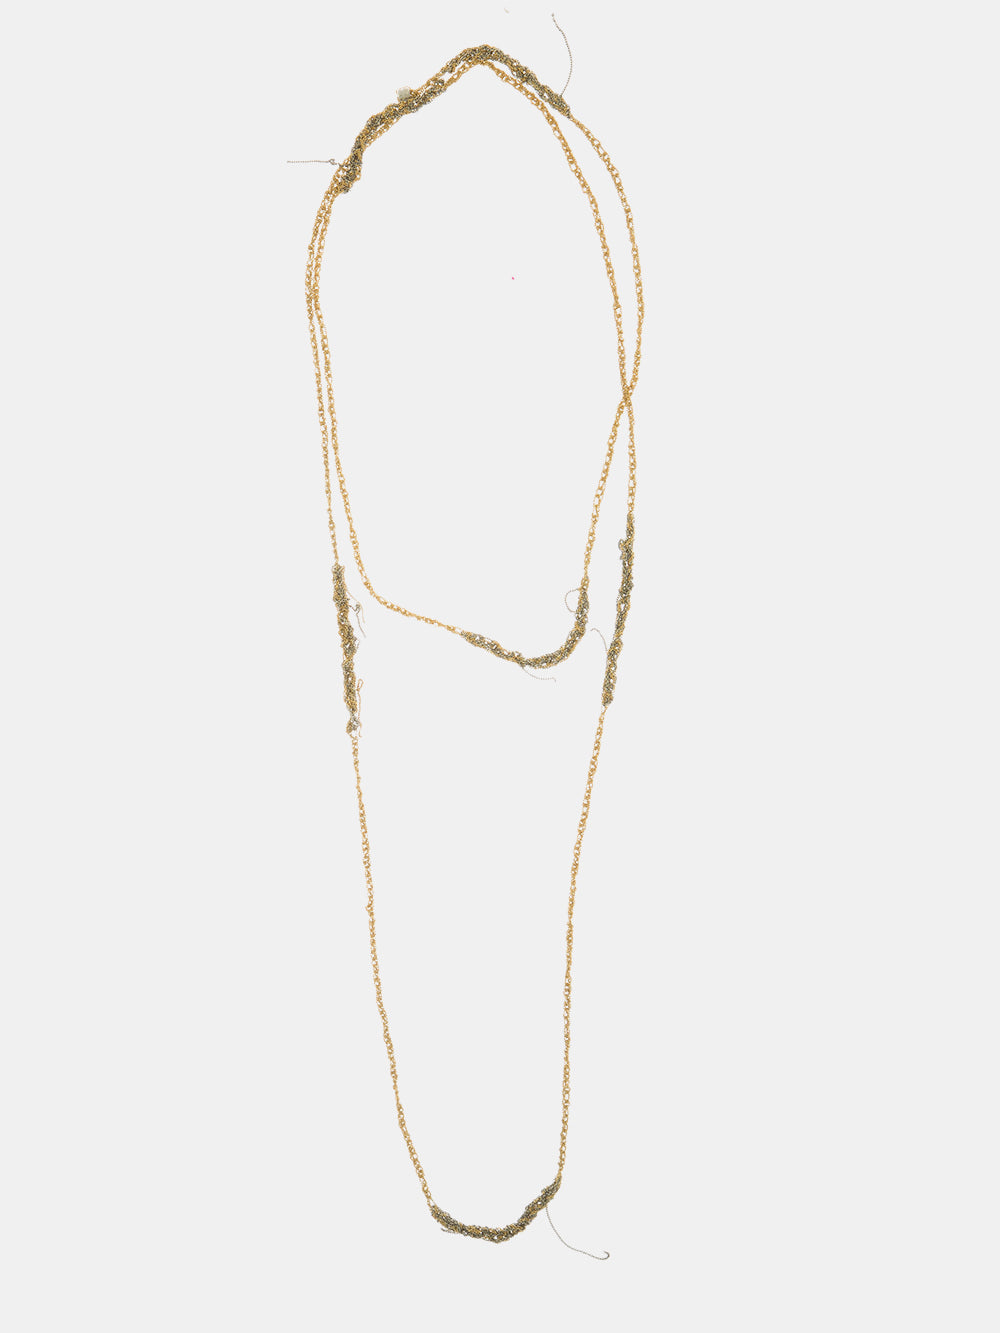 Arielle De Pinto Melded Necklace in Gold and Haze